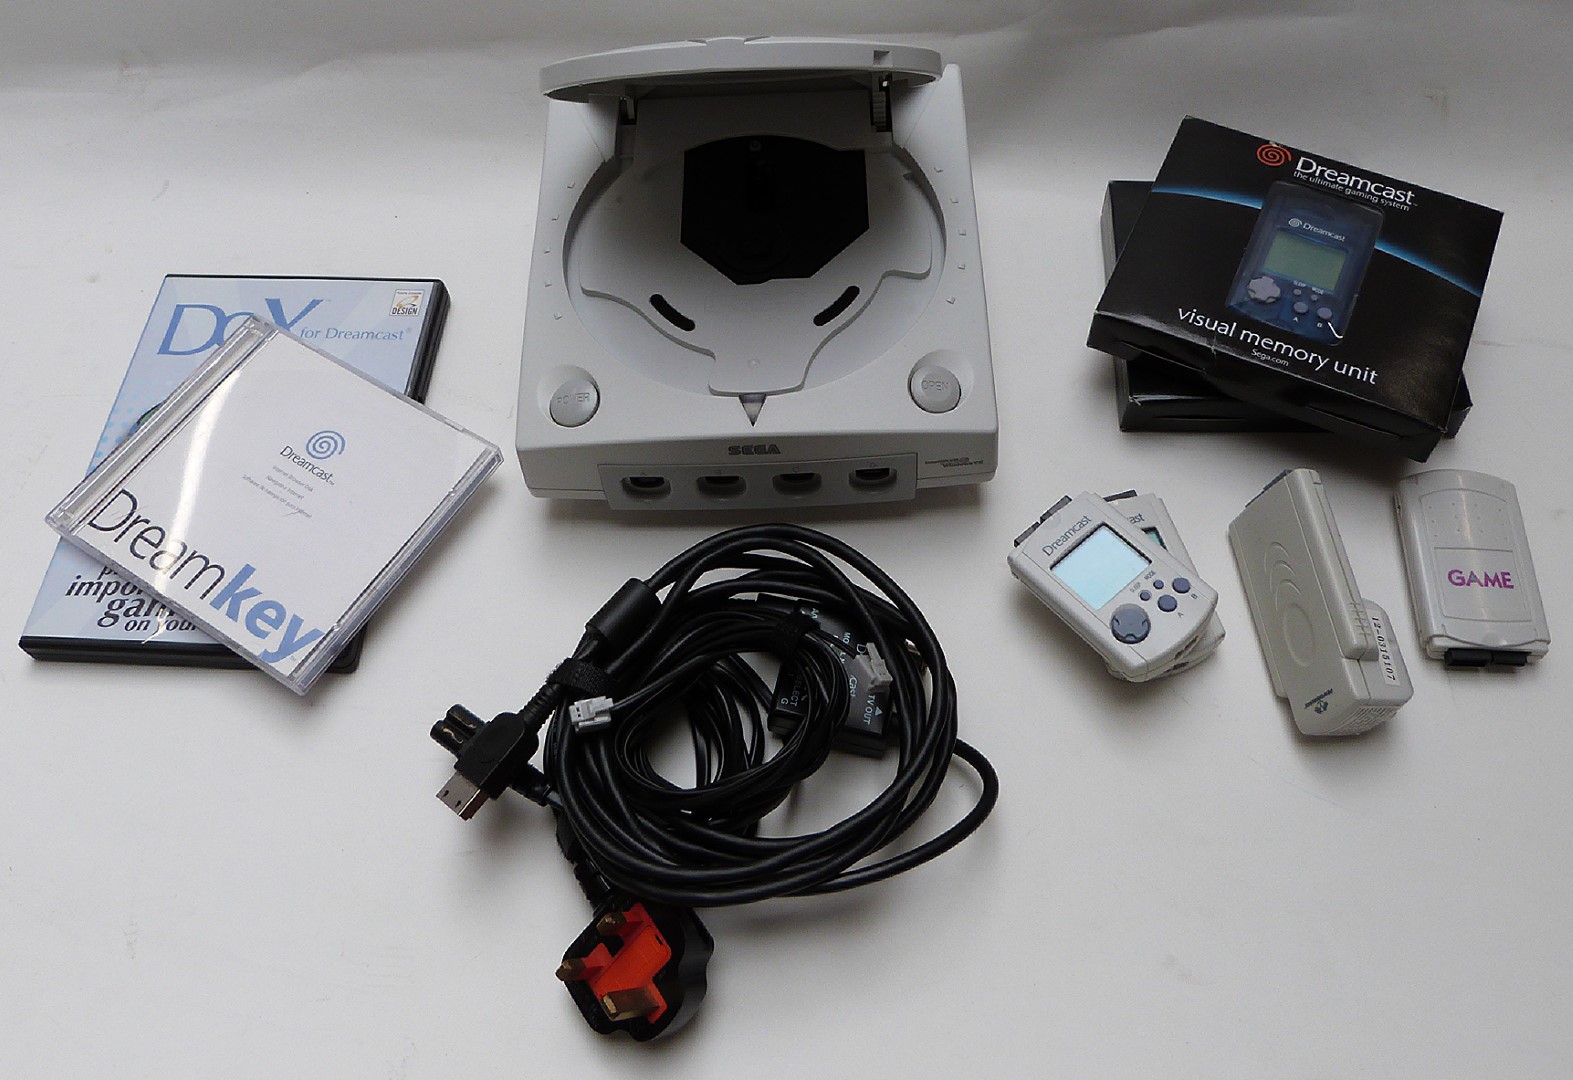 Dreamcast video games console, in original box. - Image 3 of 3